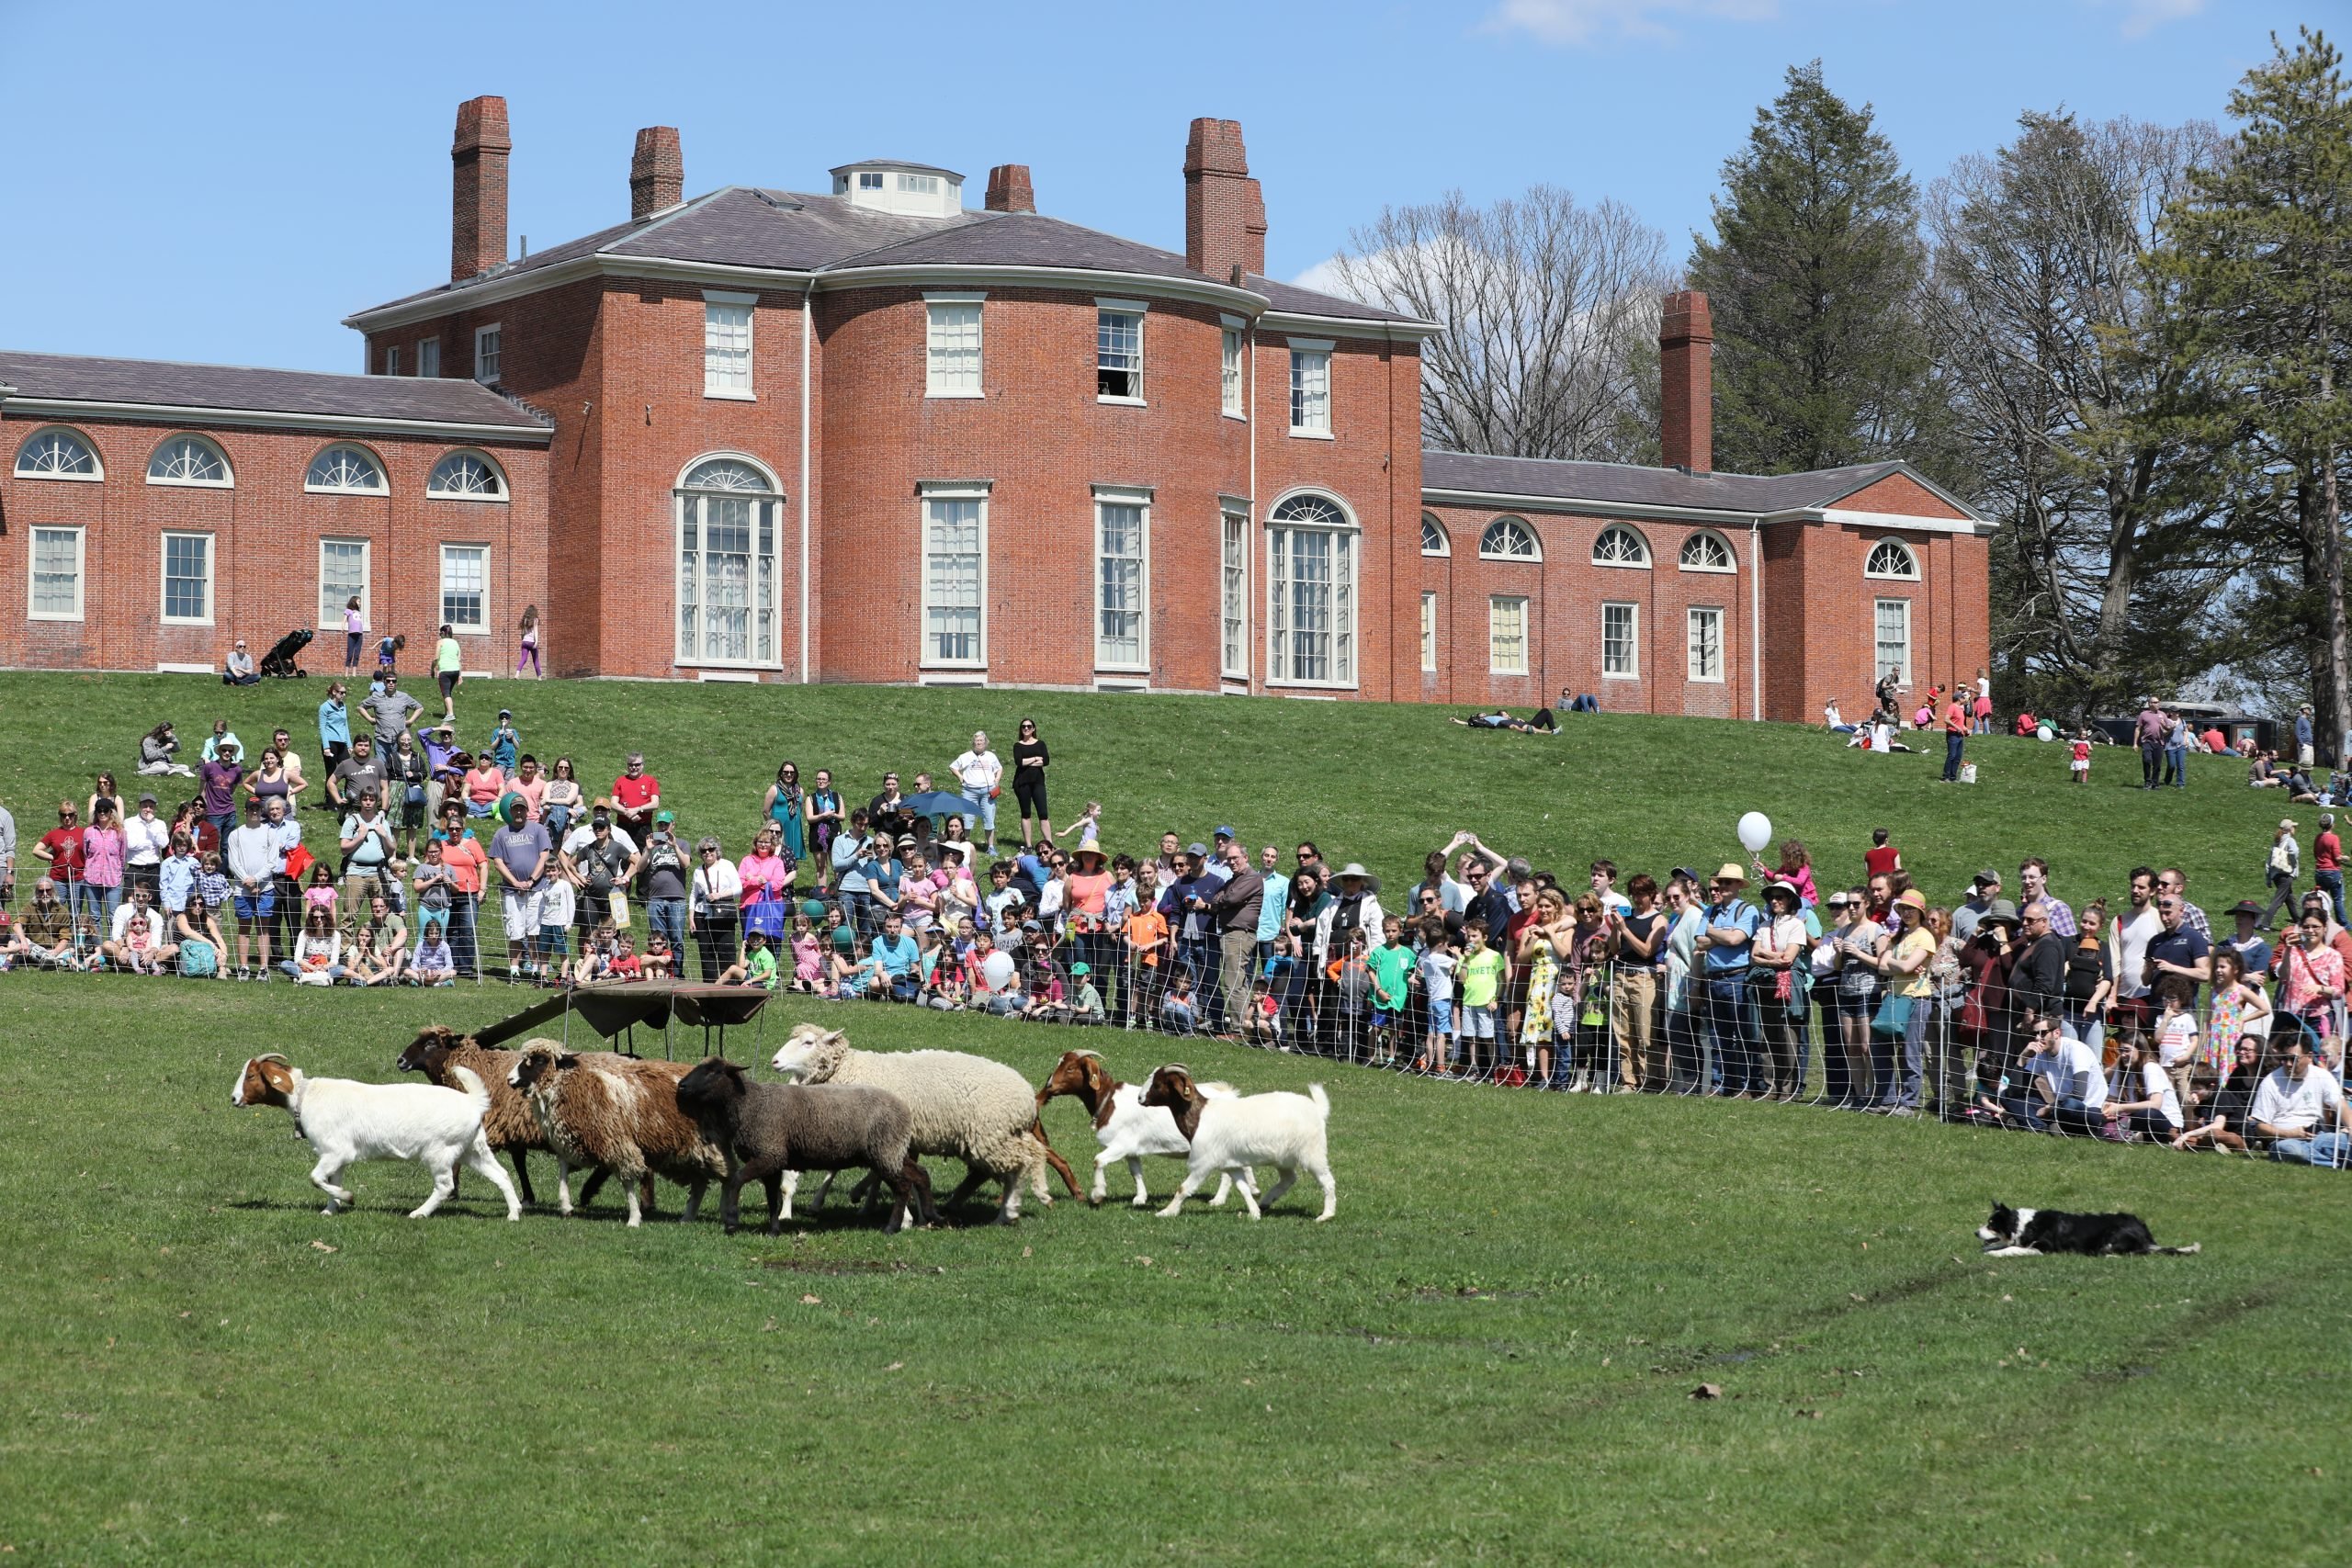 Gore Place Sheepshearing Festival during April school vacation week